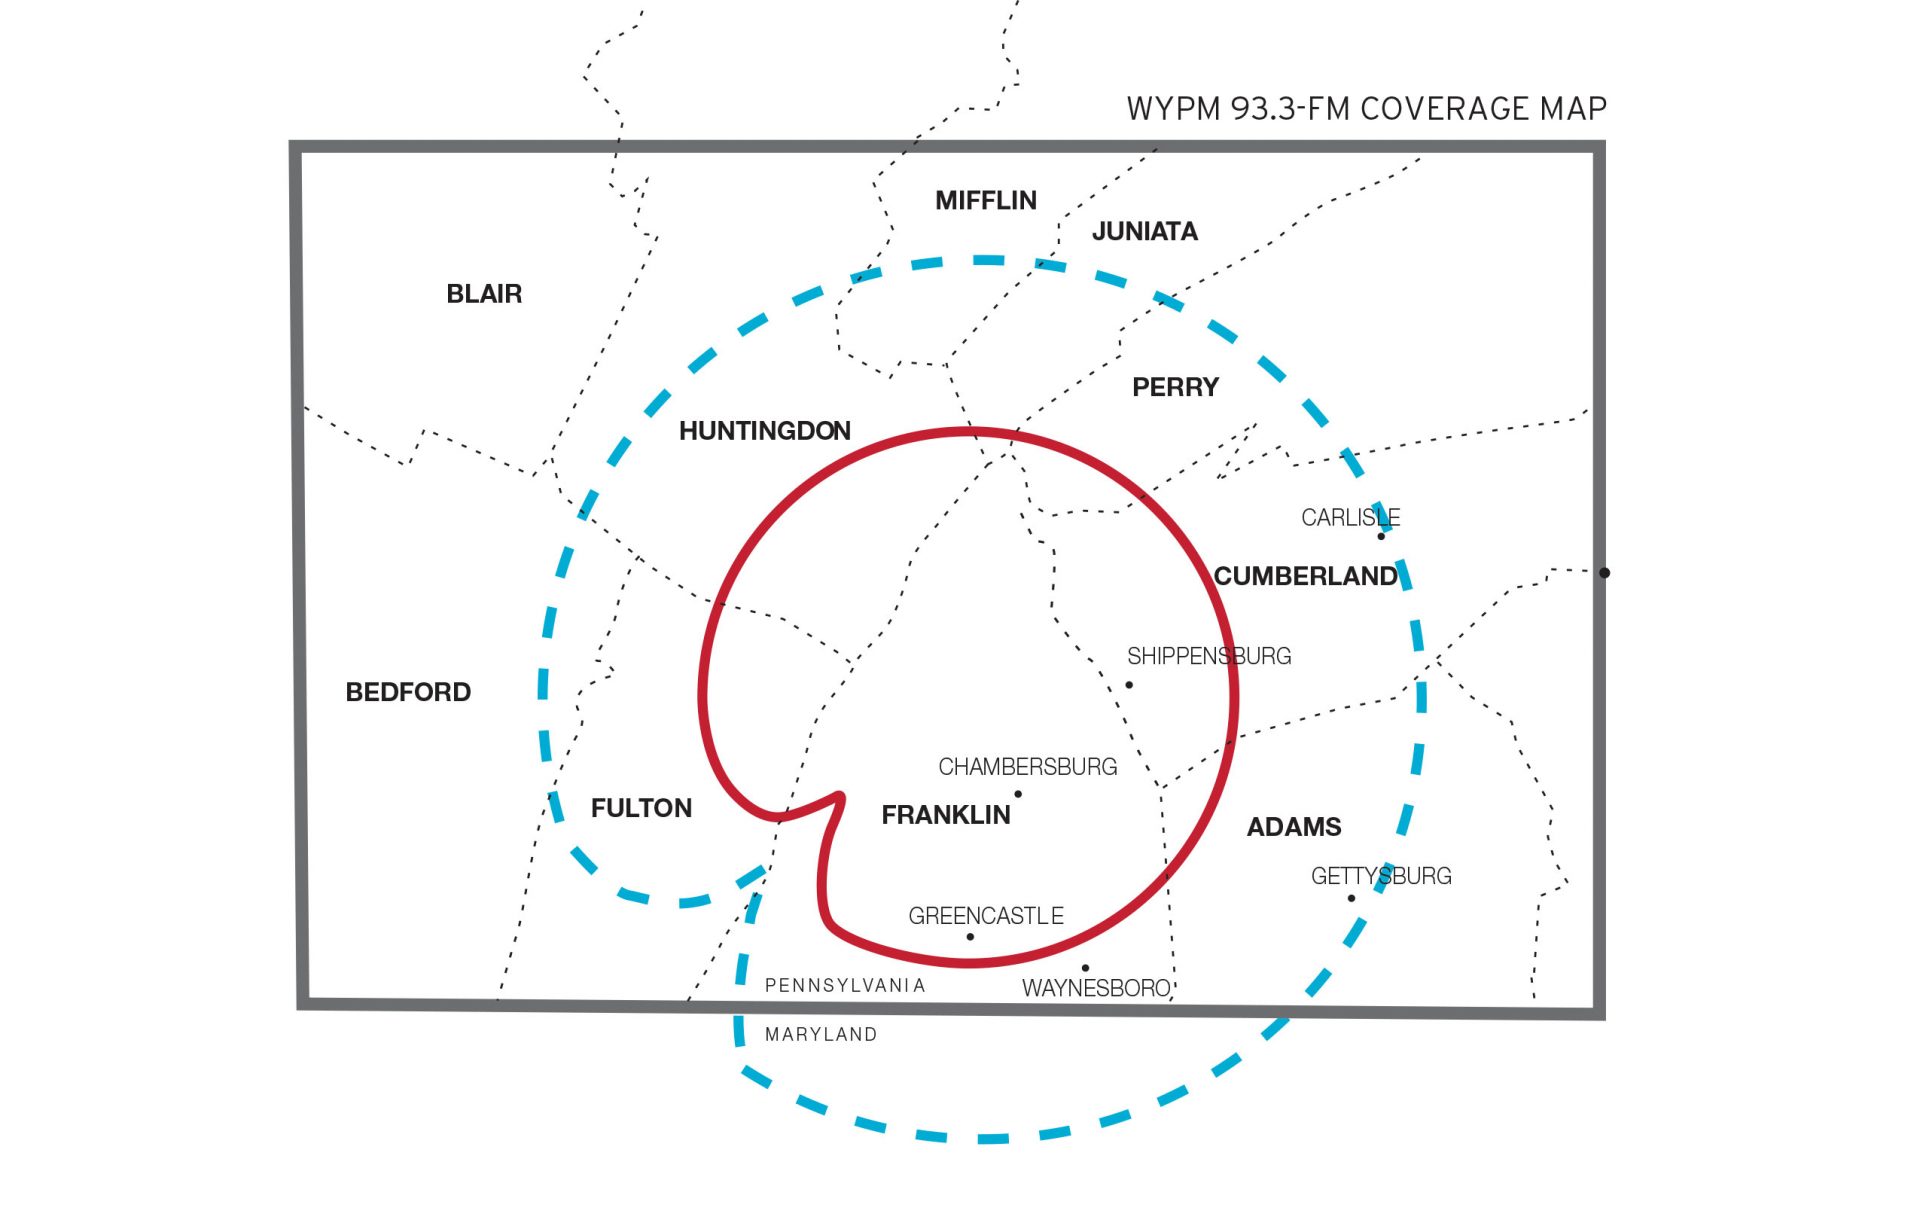 Coverage map of WITF 93.3